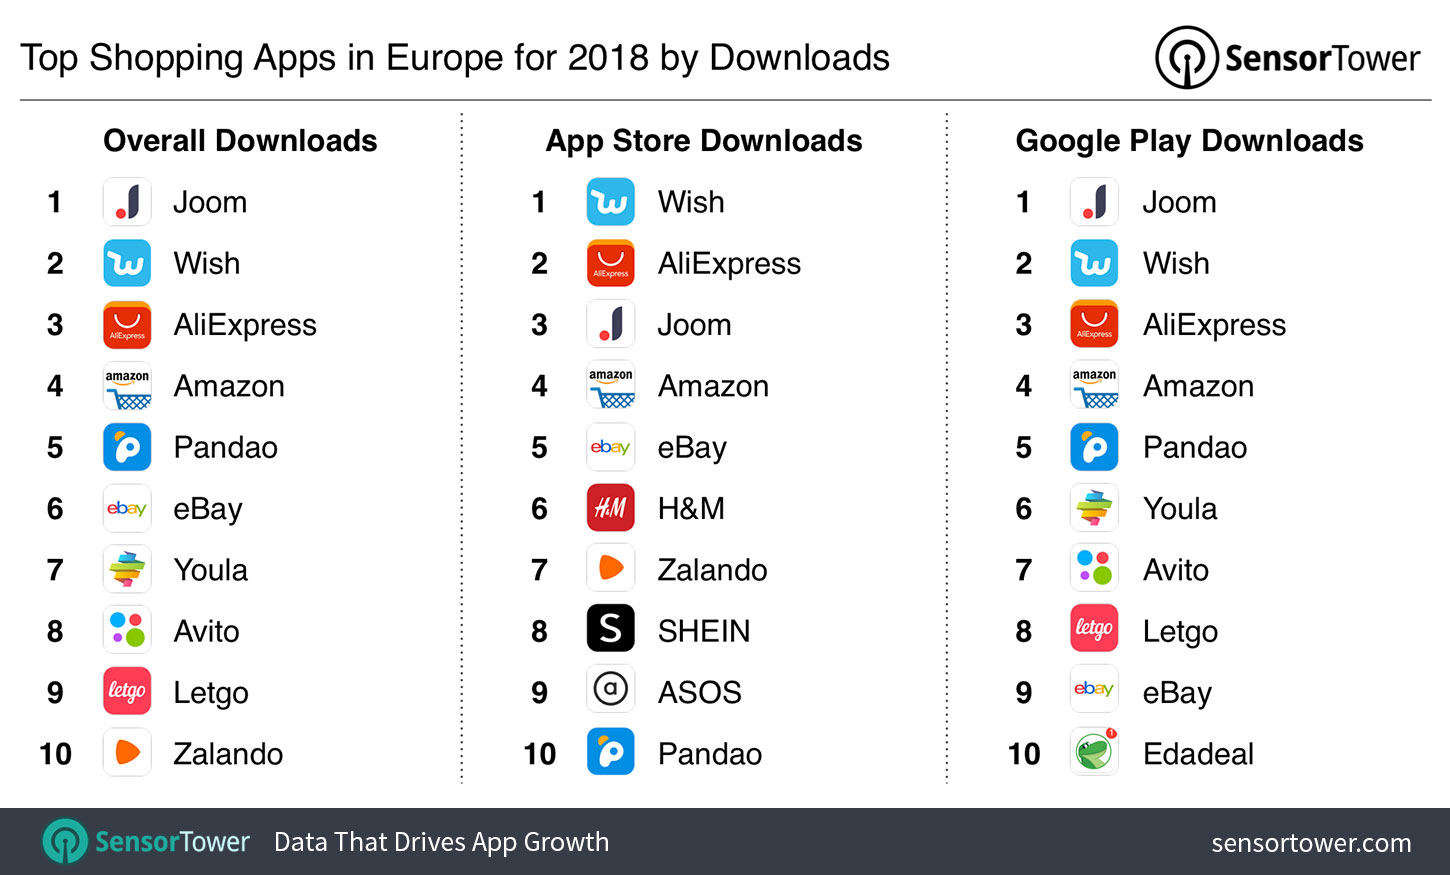 Top Shopping Apps in Europe for 2018 by Downloads